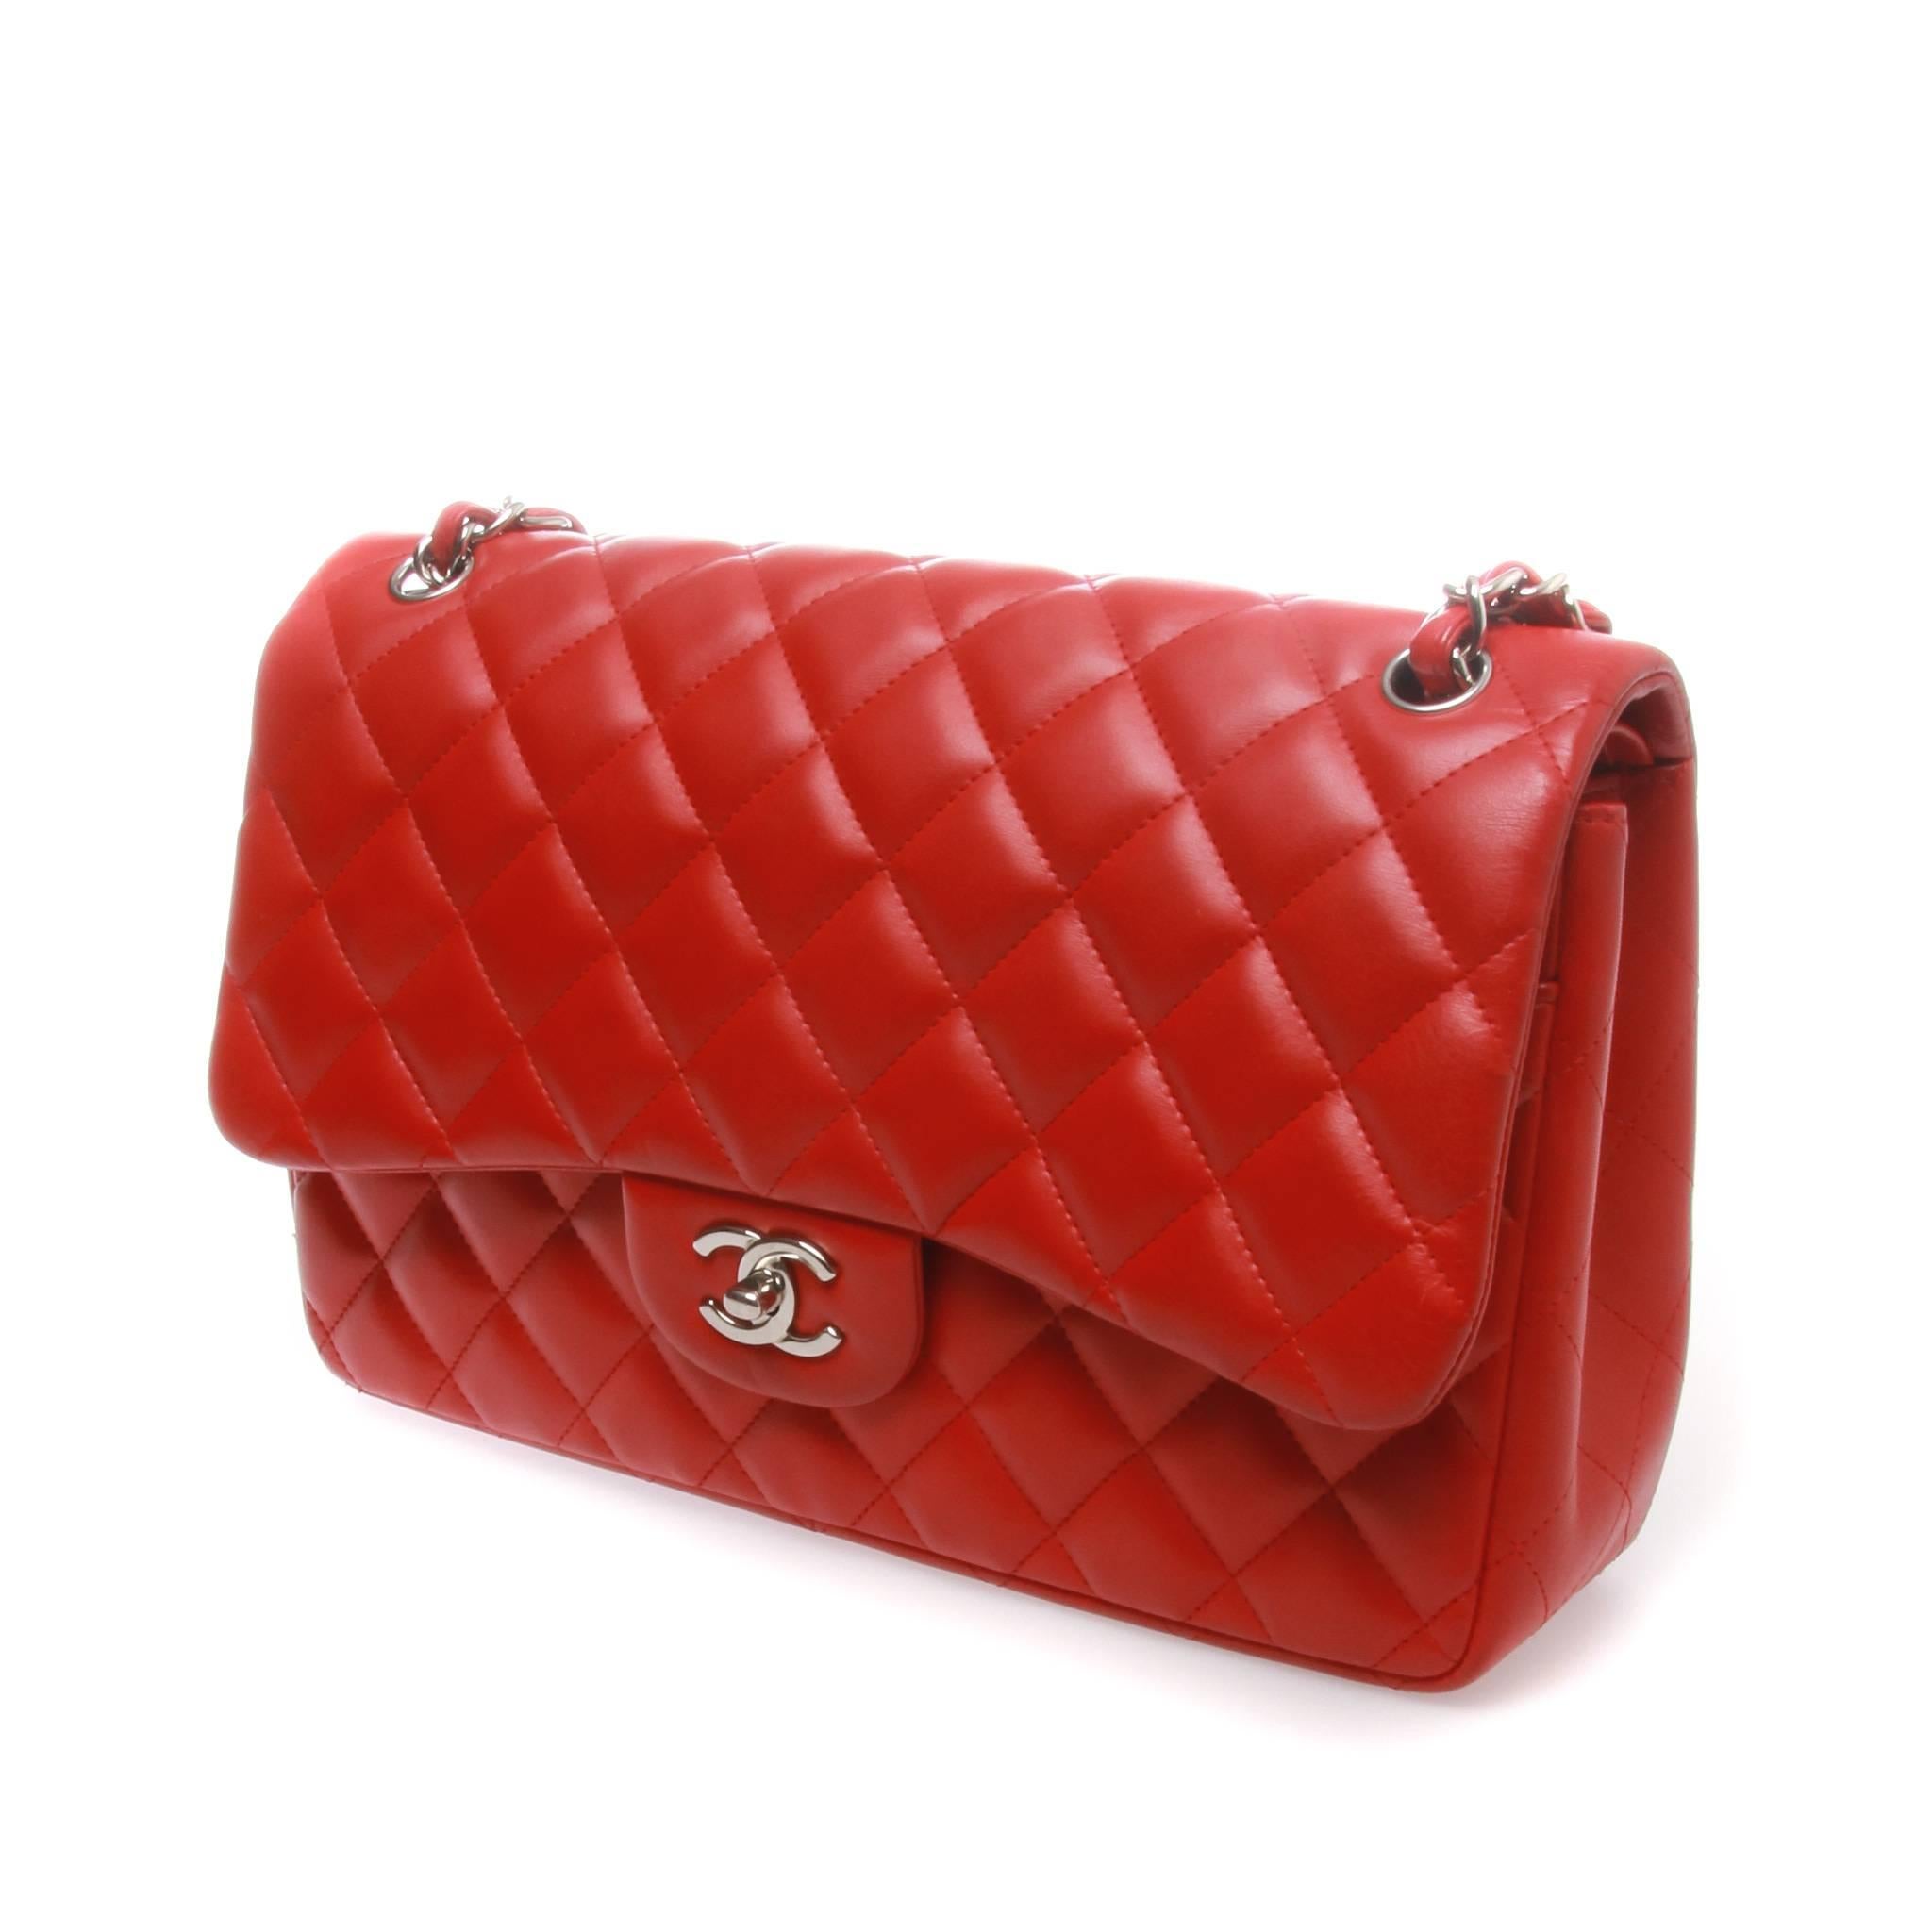 This Chanel dark red quilted lambskin leather classic jumbo double flap bag is perhaps the most sought after bag in Chanel's classic collection. 
This particular bag features quilted lambskin leather that is durable and classy and also features a